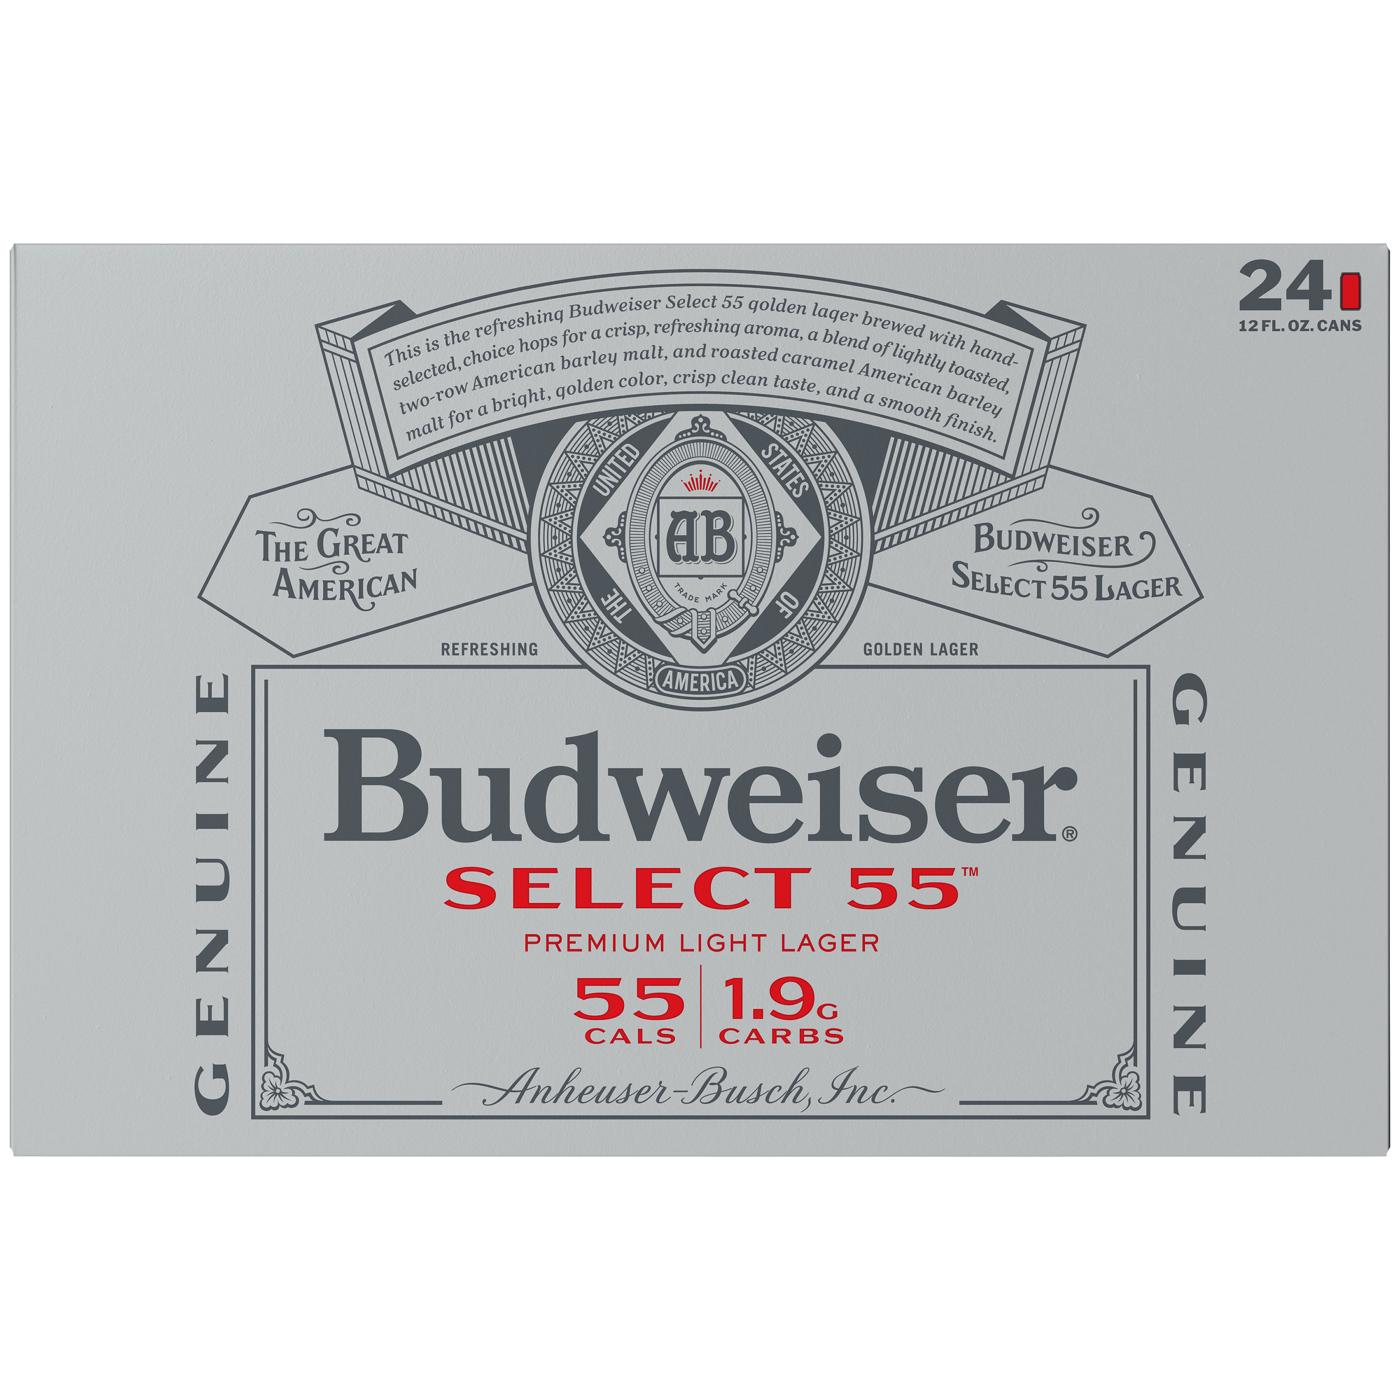 Budweiser Bud Select 55 Beer 12 oz Cans; image 2 of 2